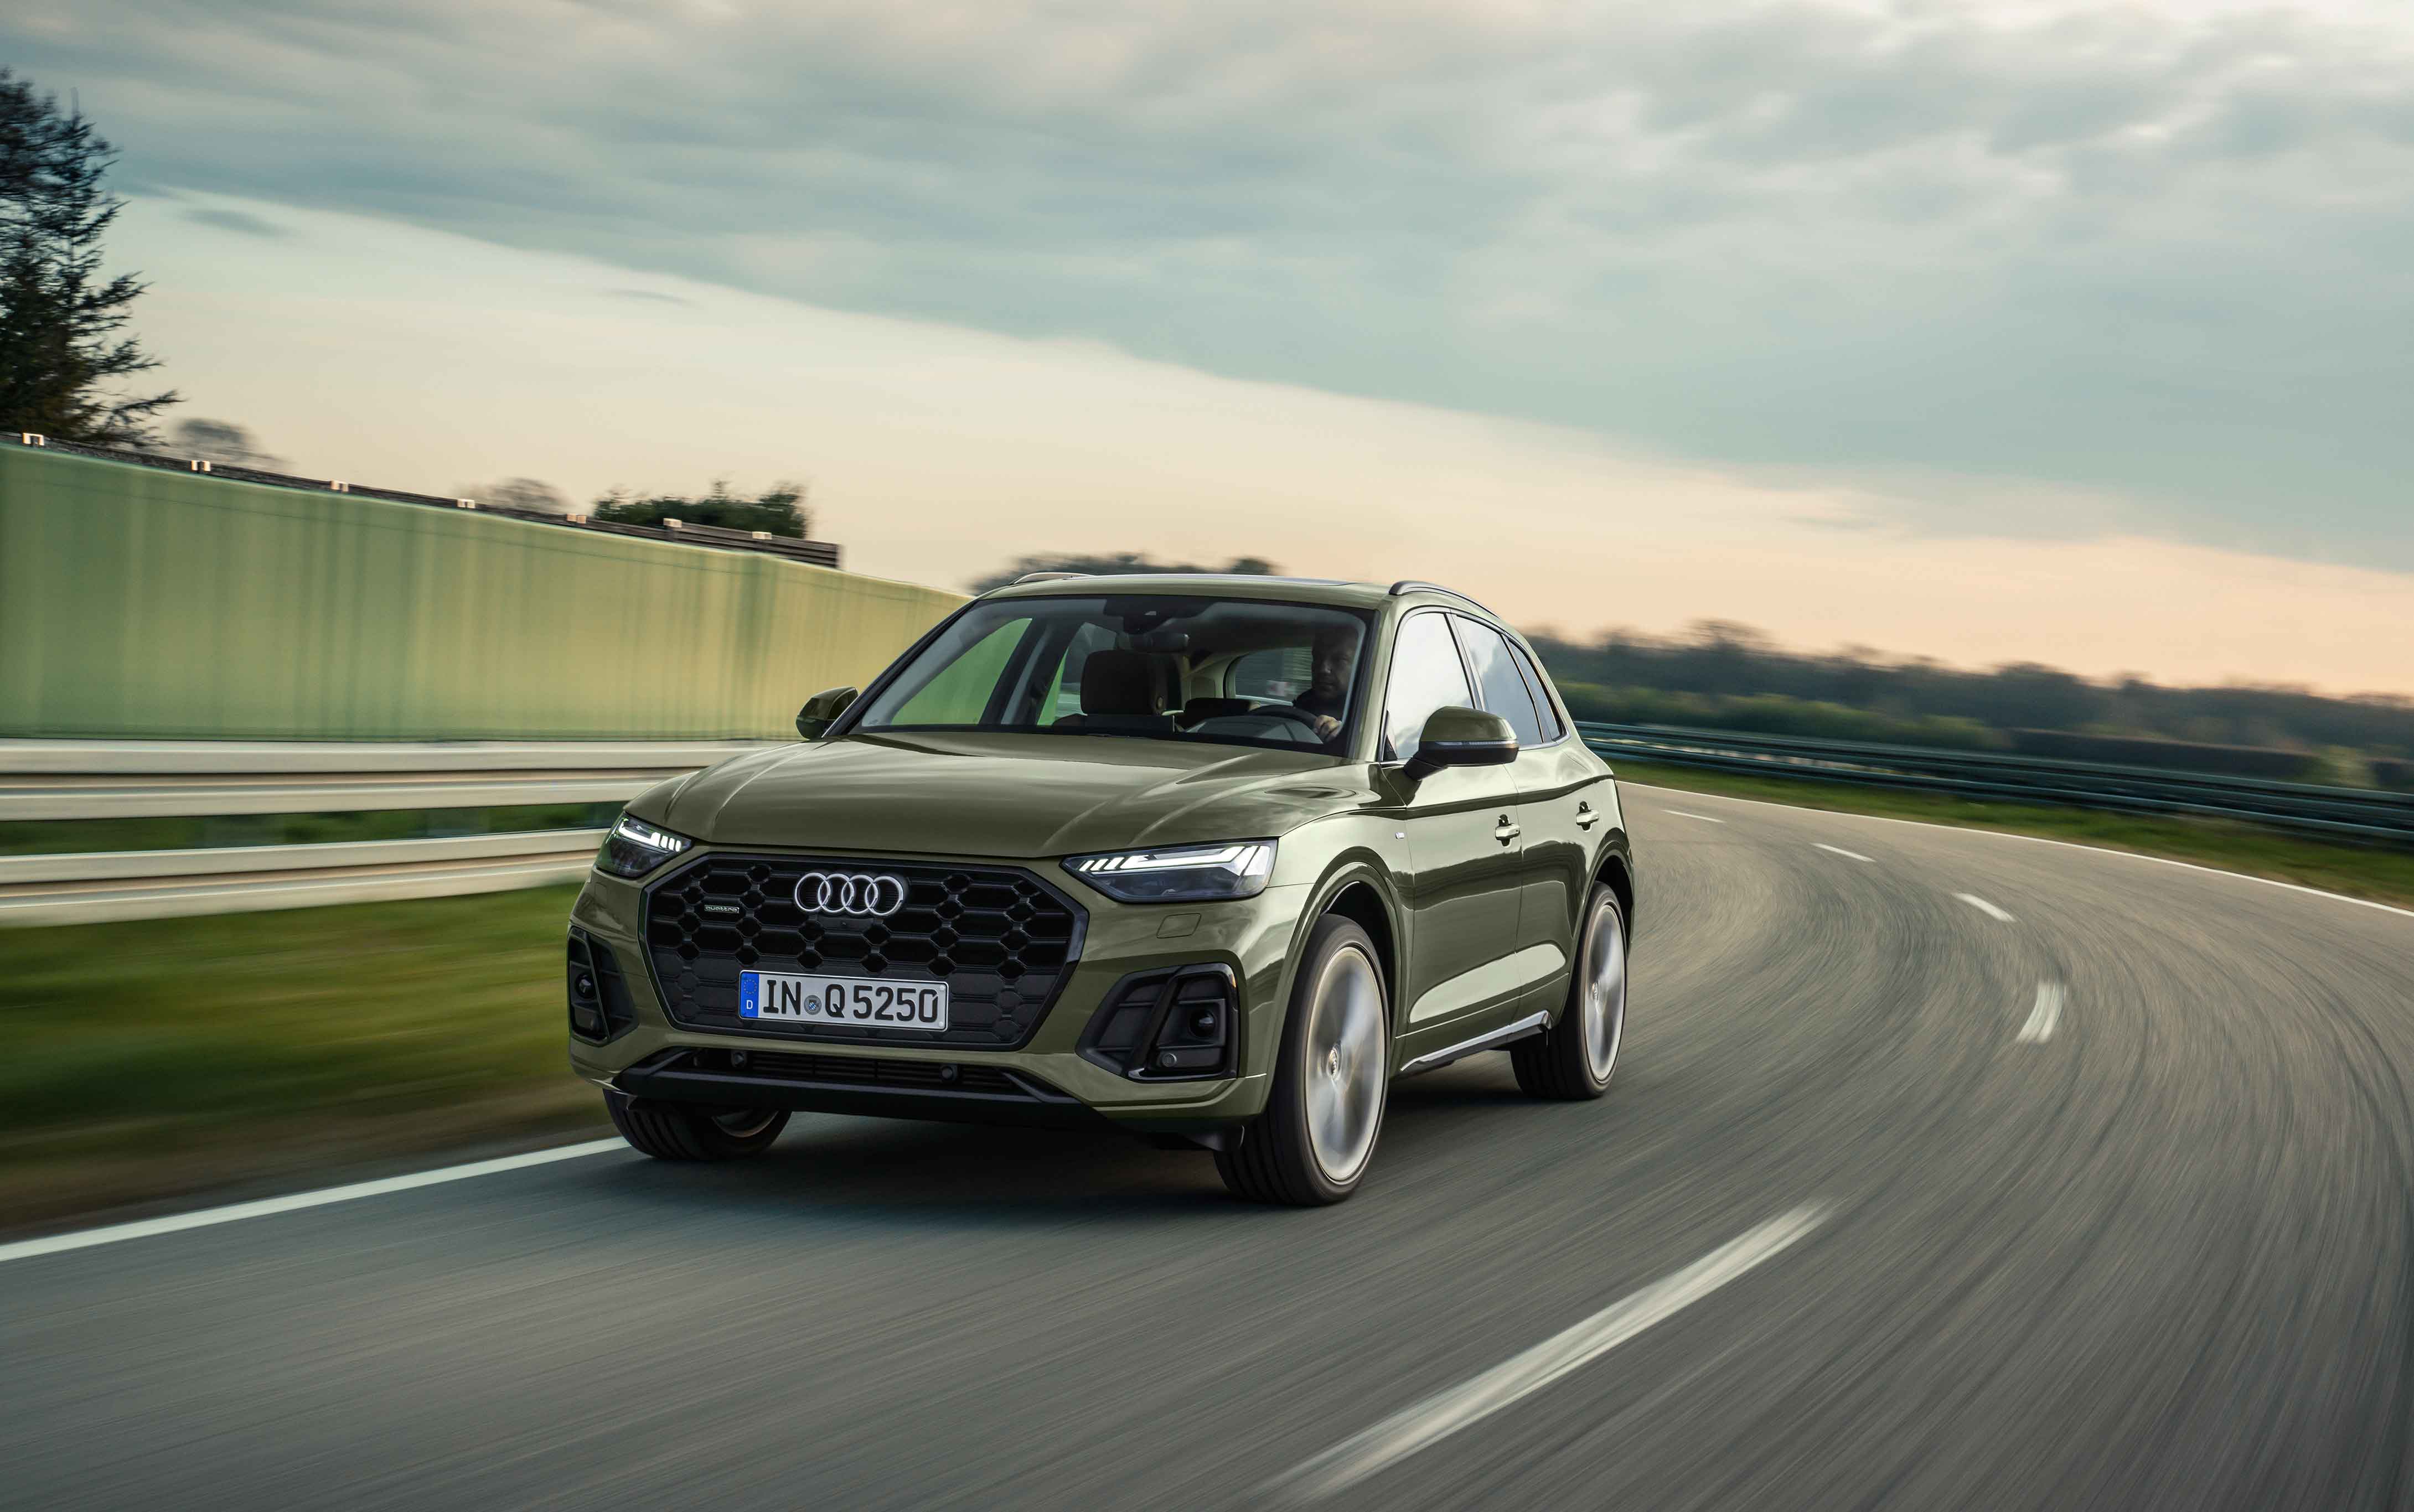 2021 Audi Q5 family delivers sharp design, sporty performance, and versatility